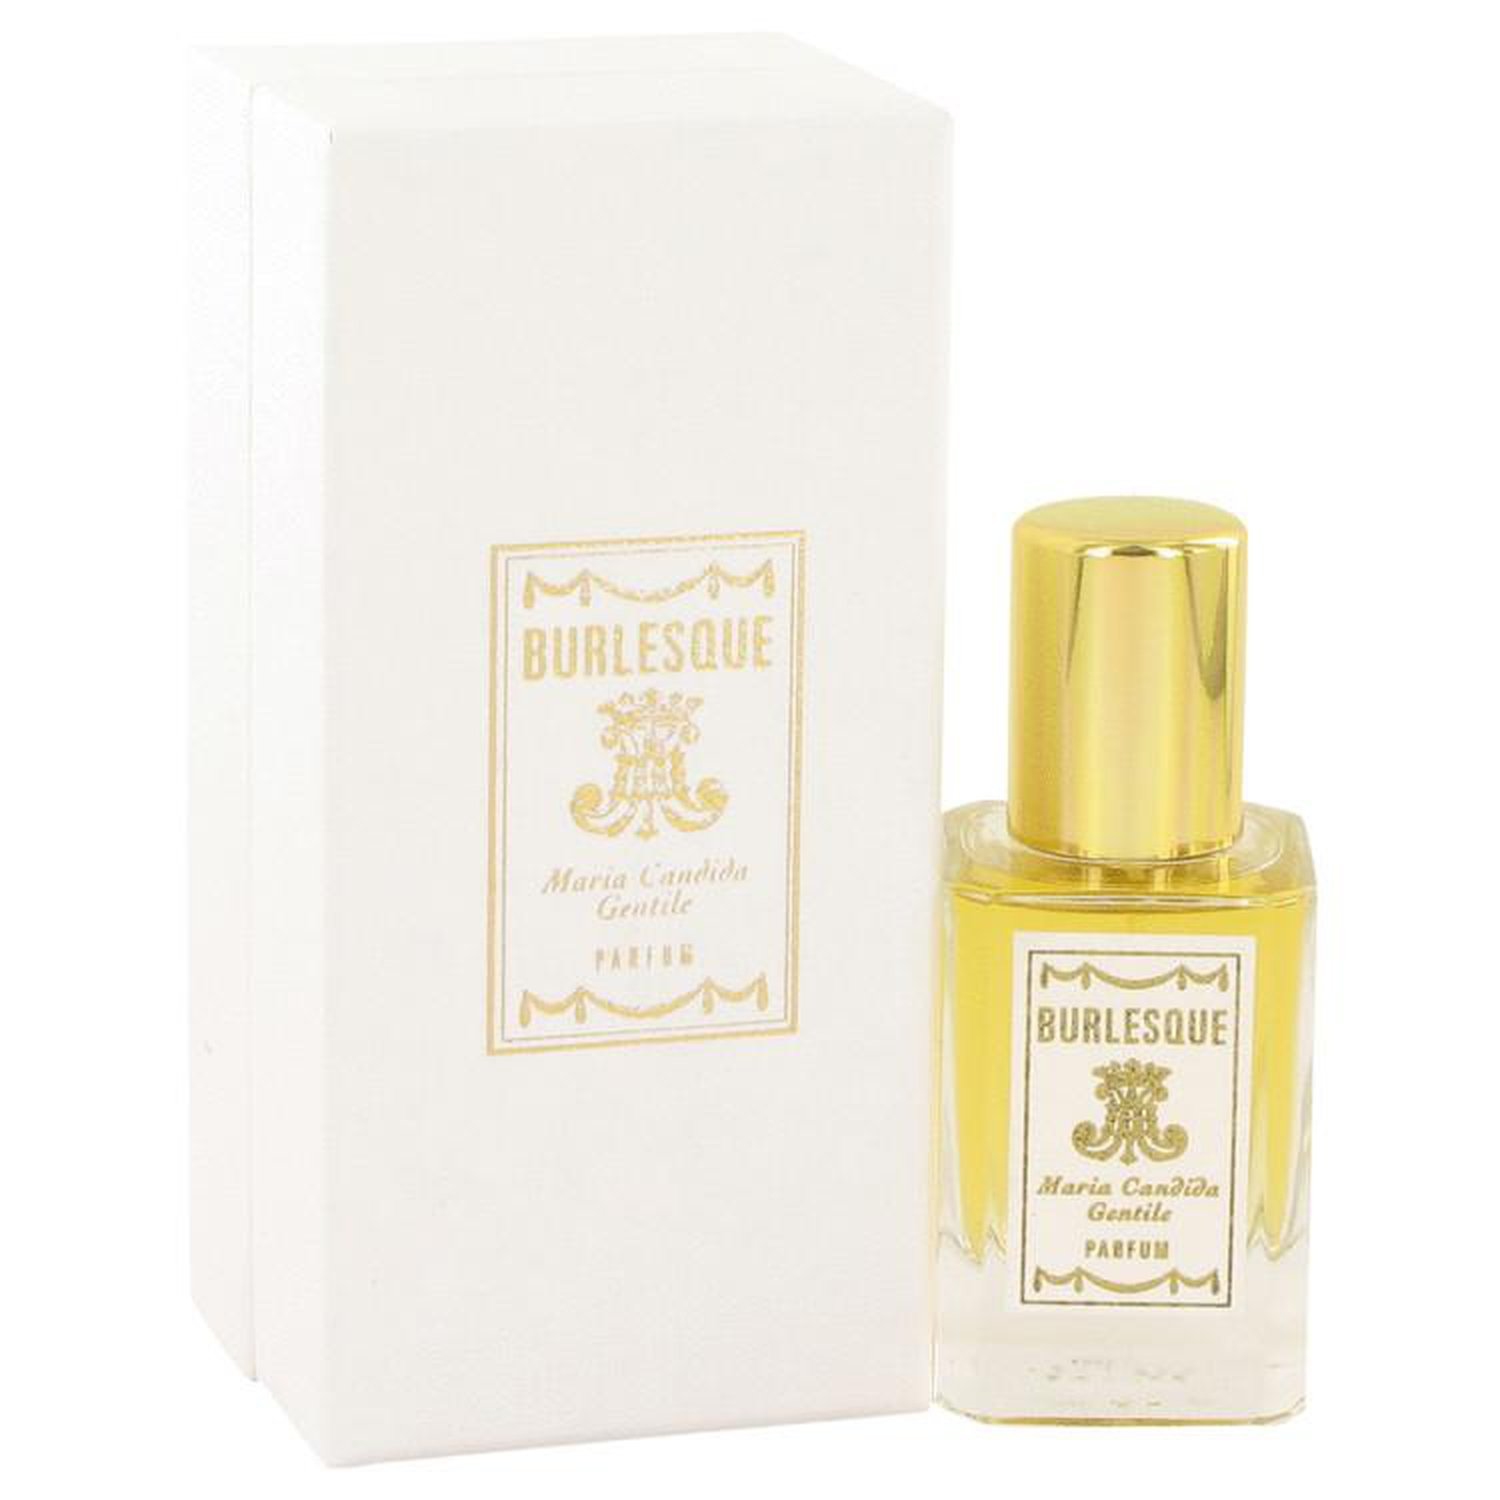 Burlesque by Maria Candida Gentile Pure Perfume (Women) 1 oz